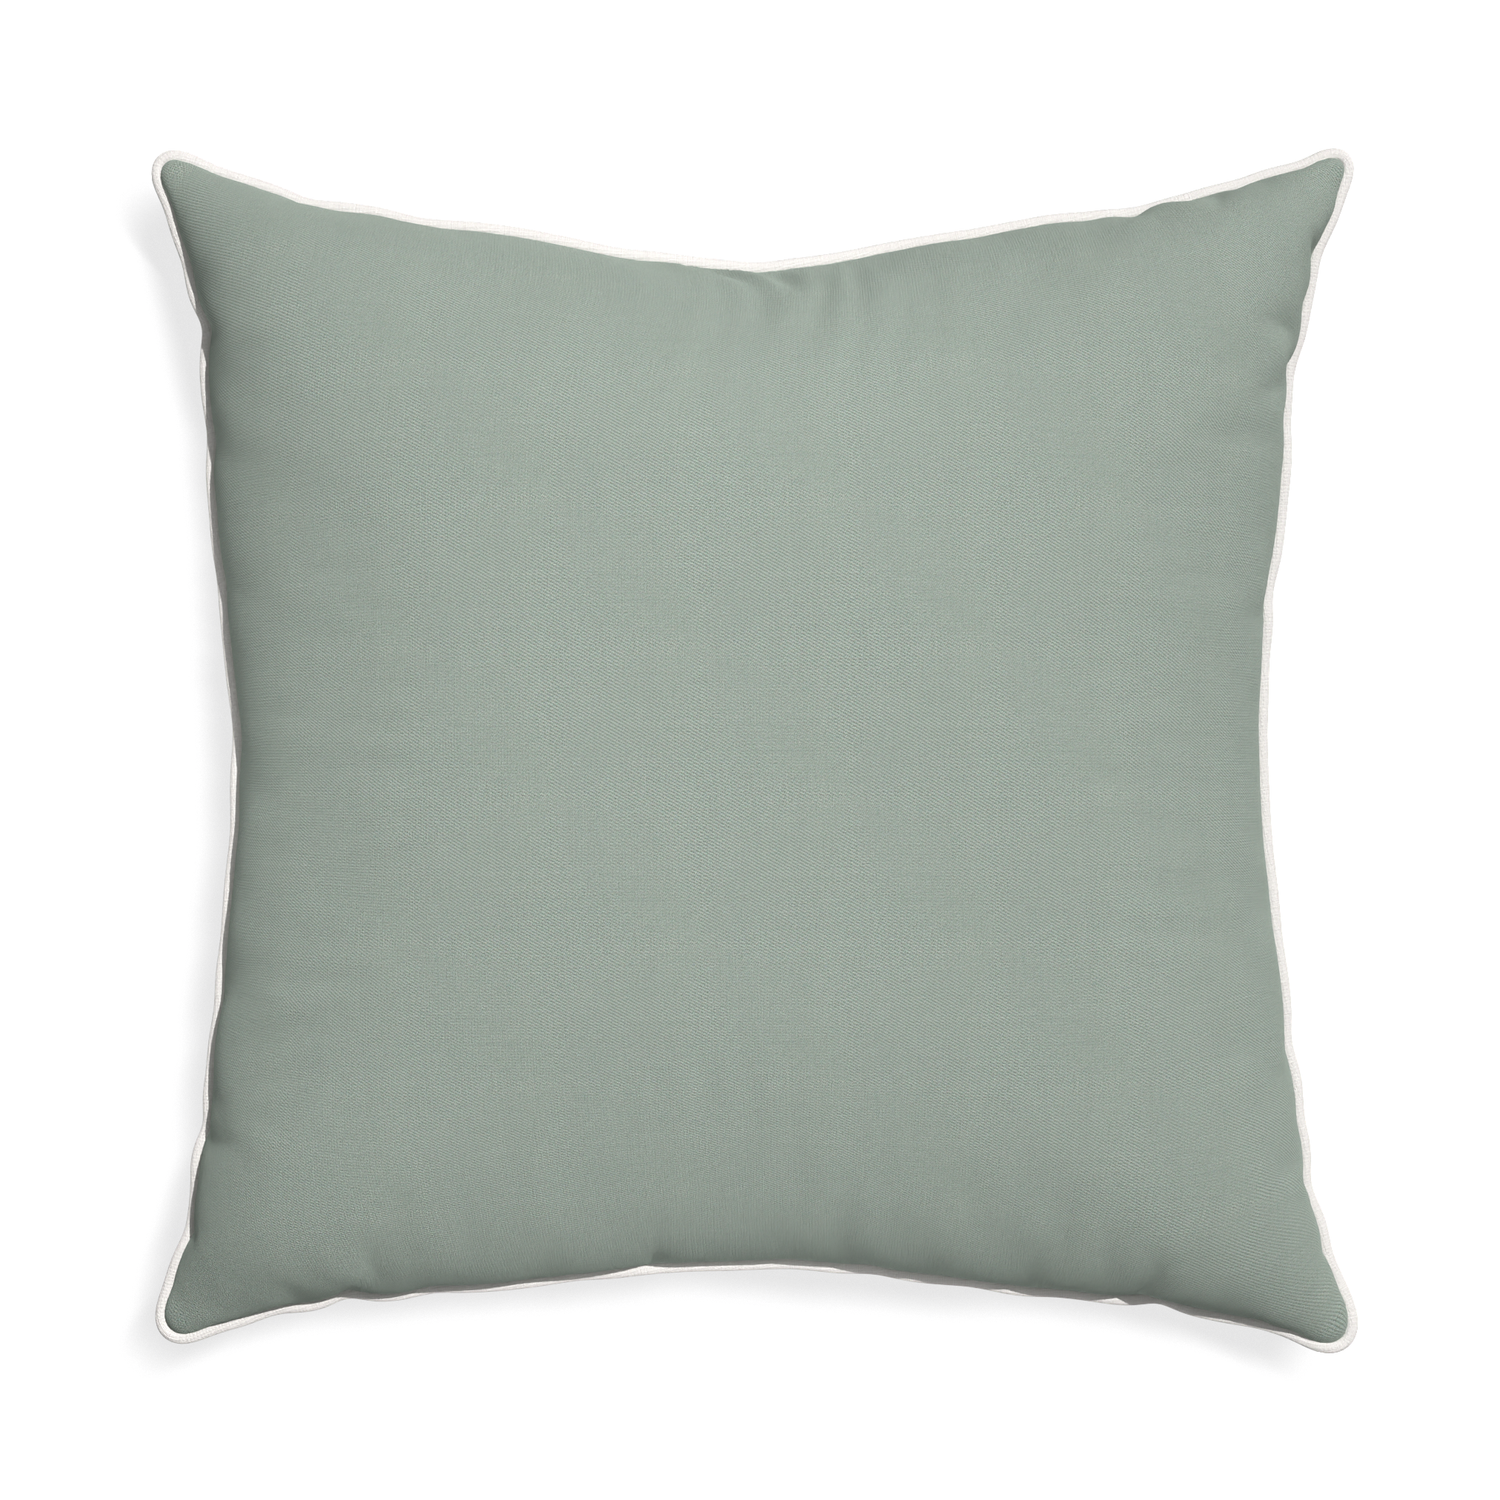 Euro-sham sage custom pillow with snow piping on white background